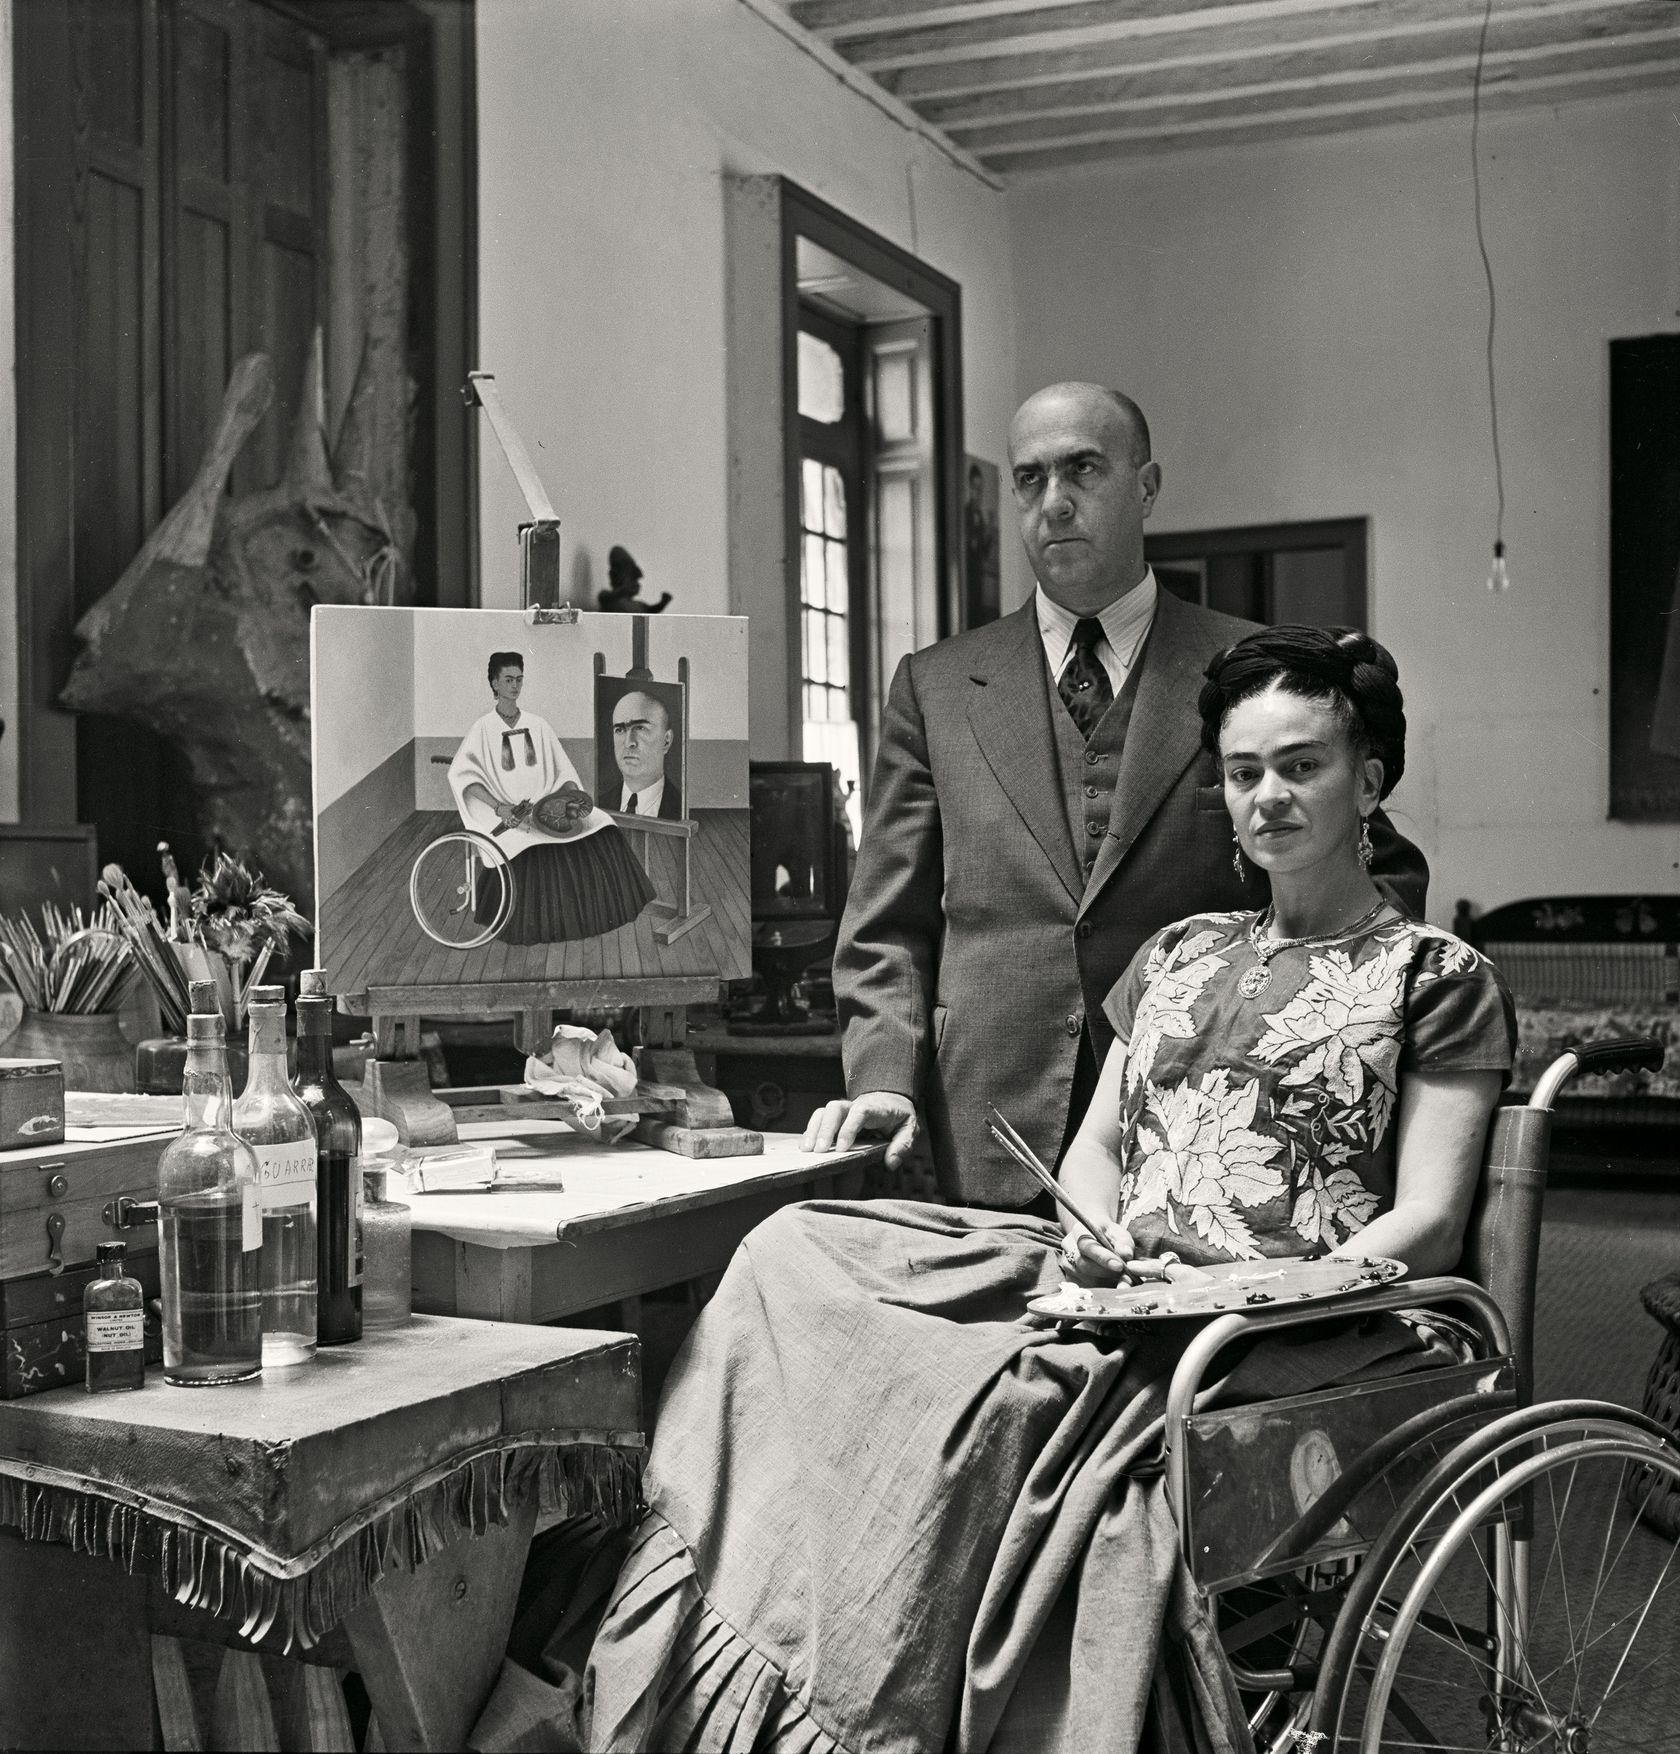 Amazing Historical Photo of Frida Kahlo with Juan Farill in 1951 